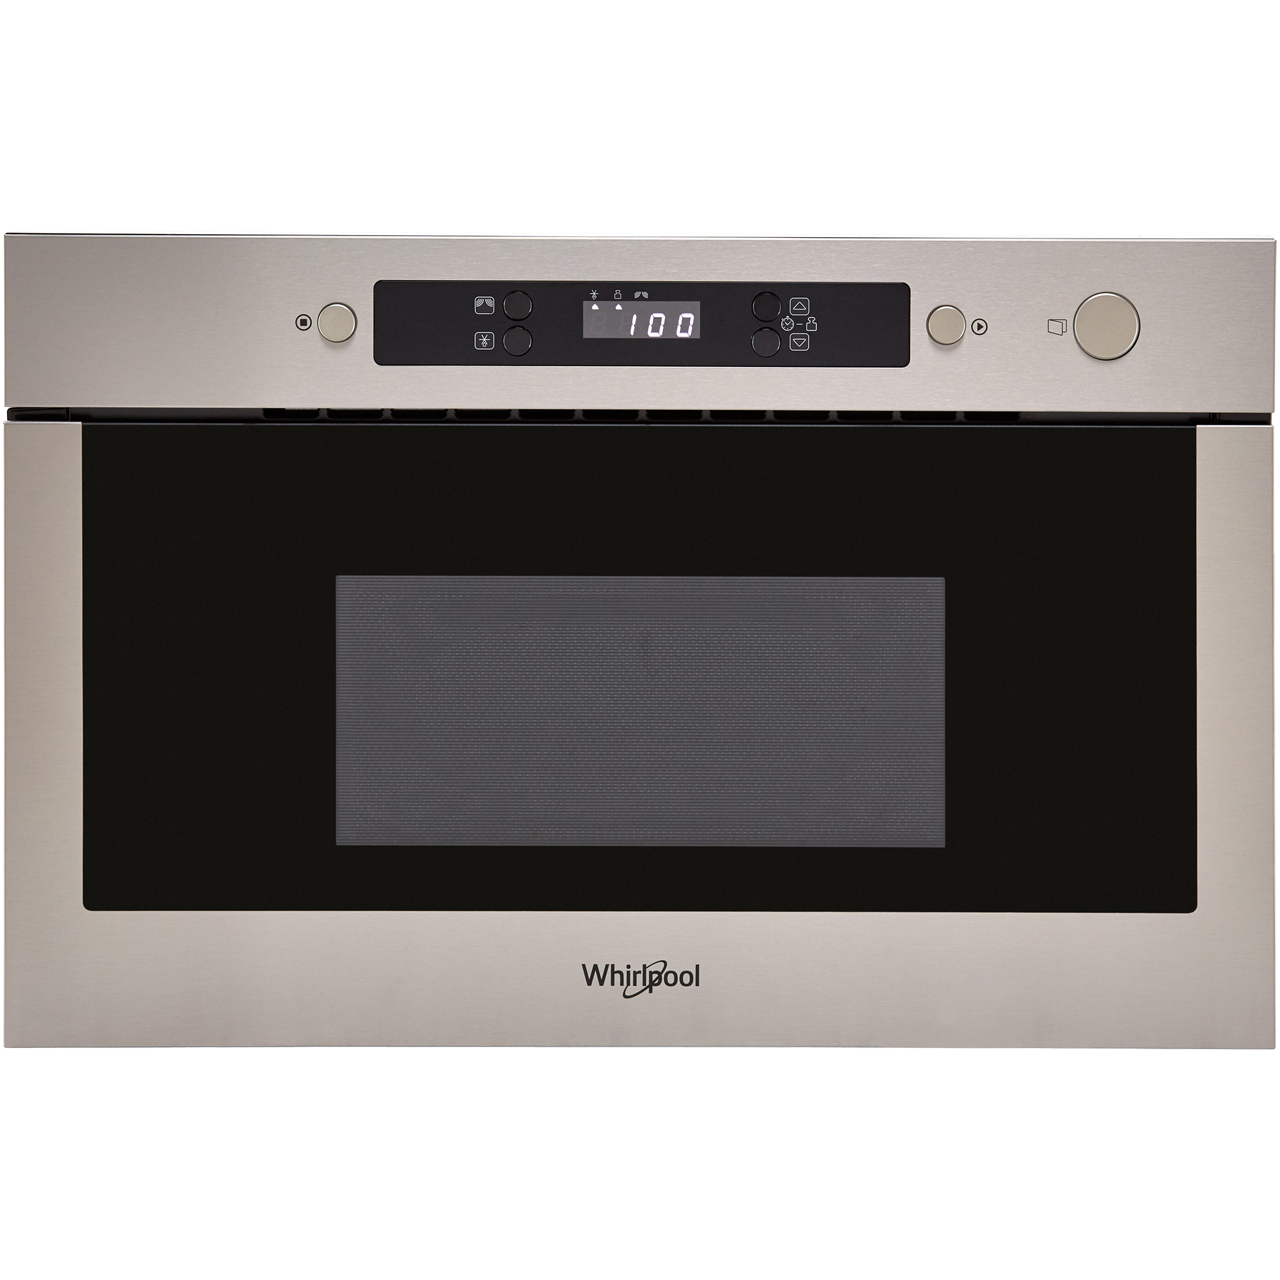 Whirlpool AMW439IX Built In MW+Grill function Review